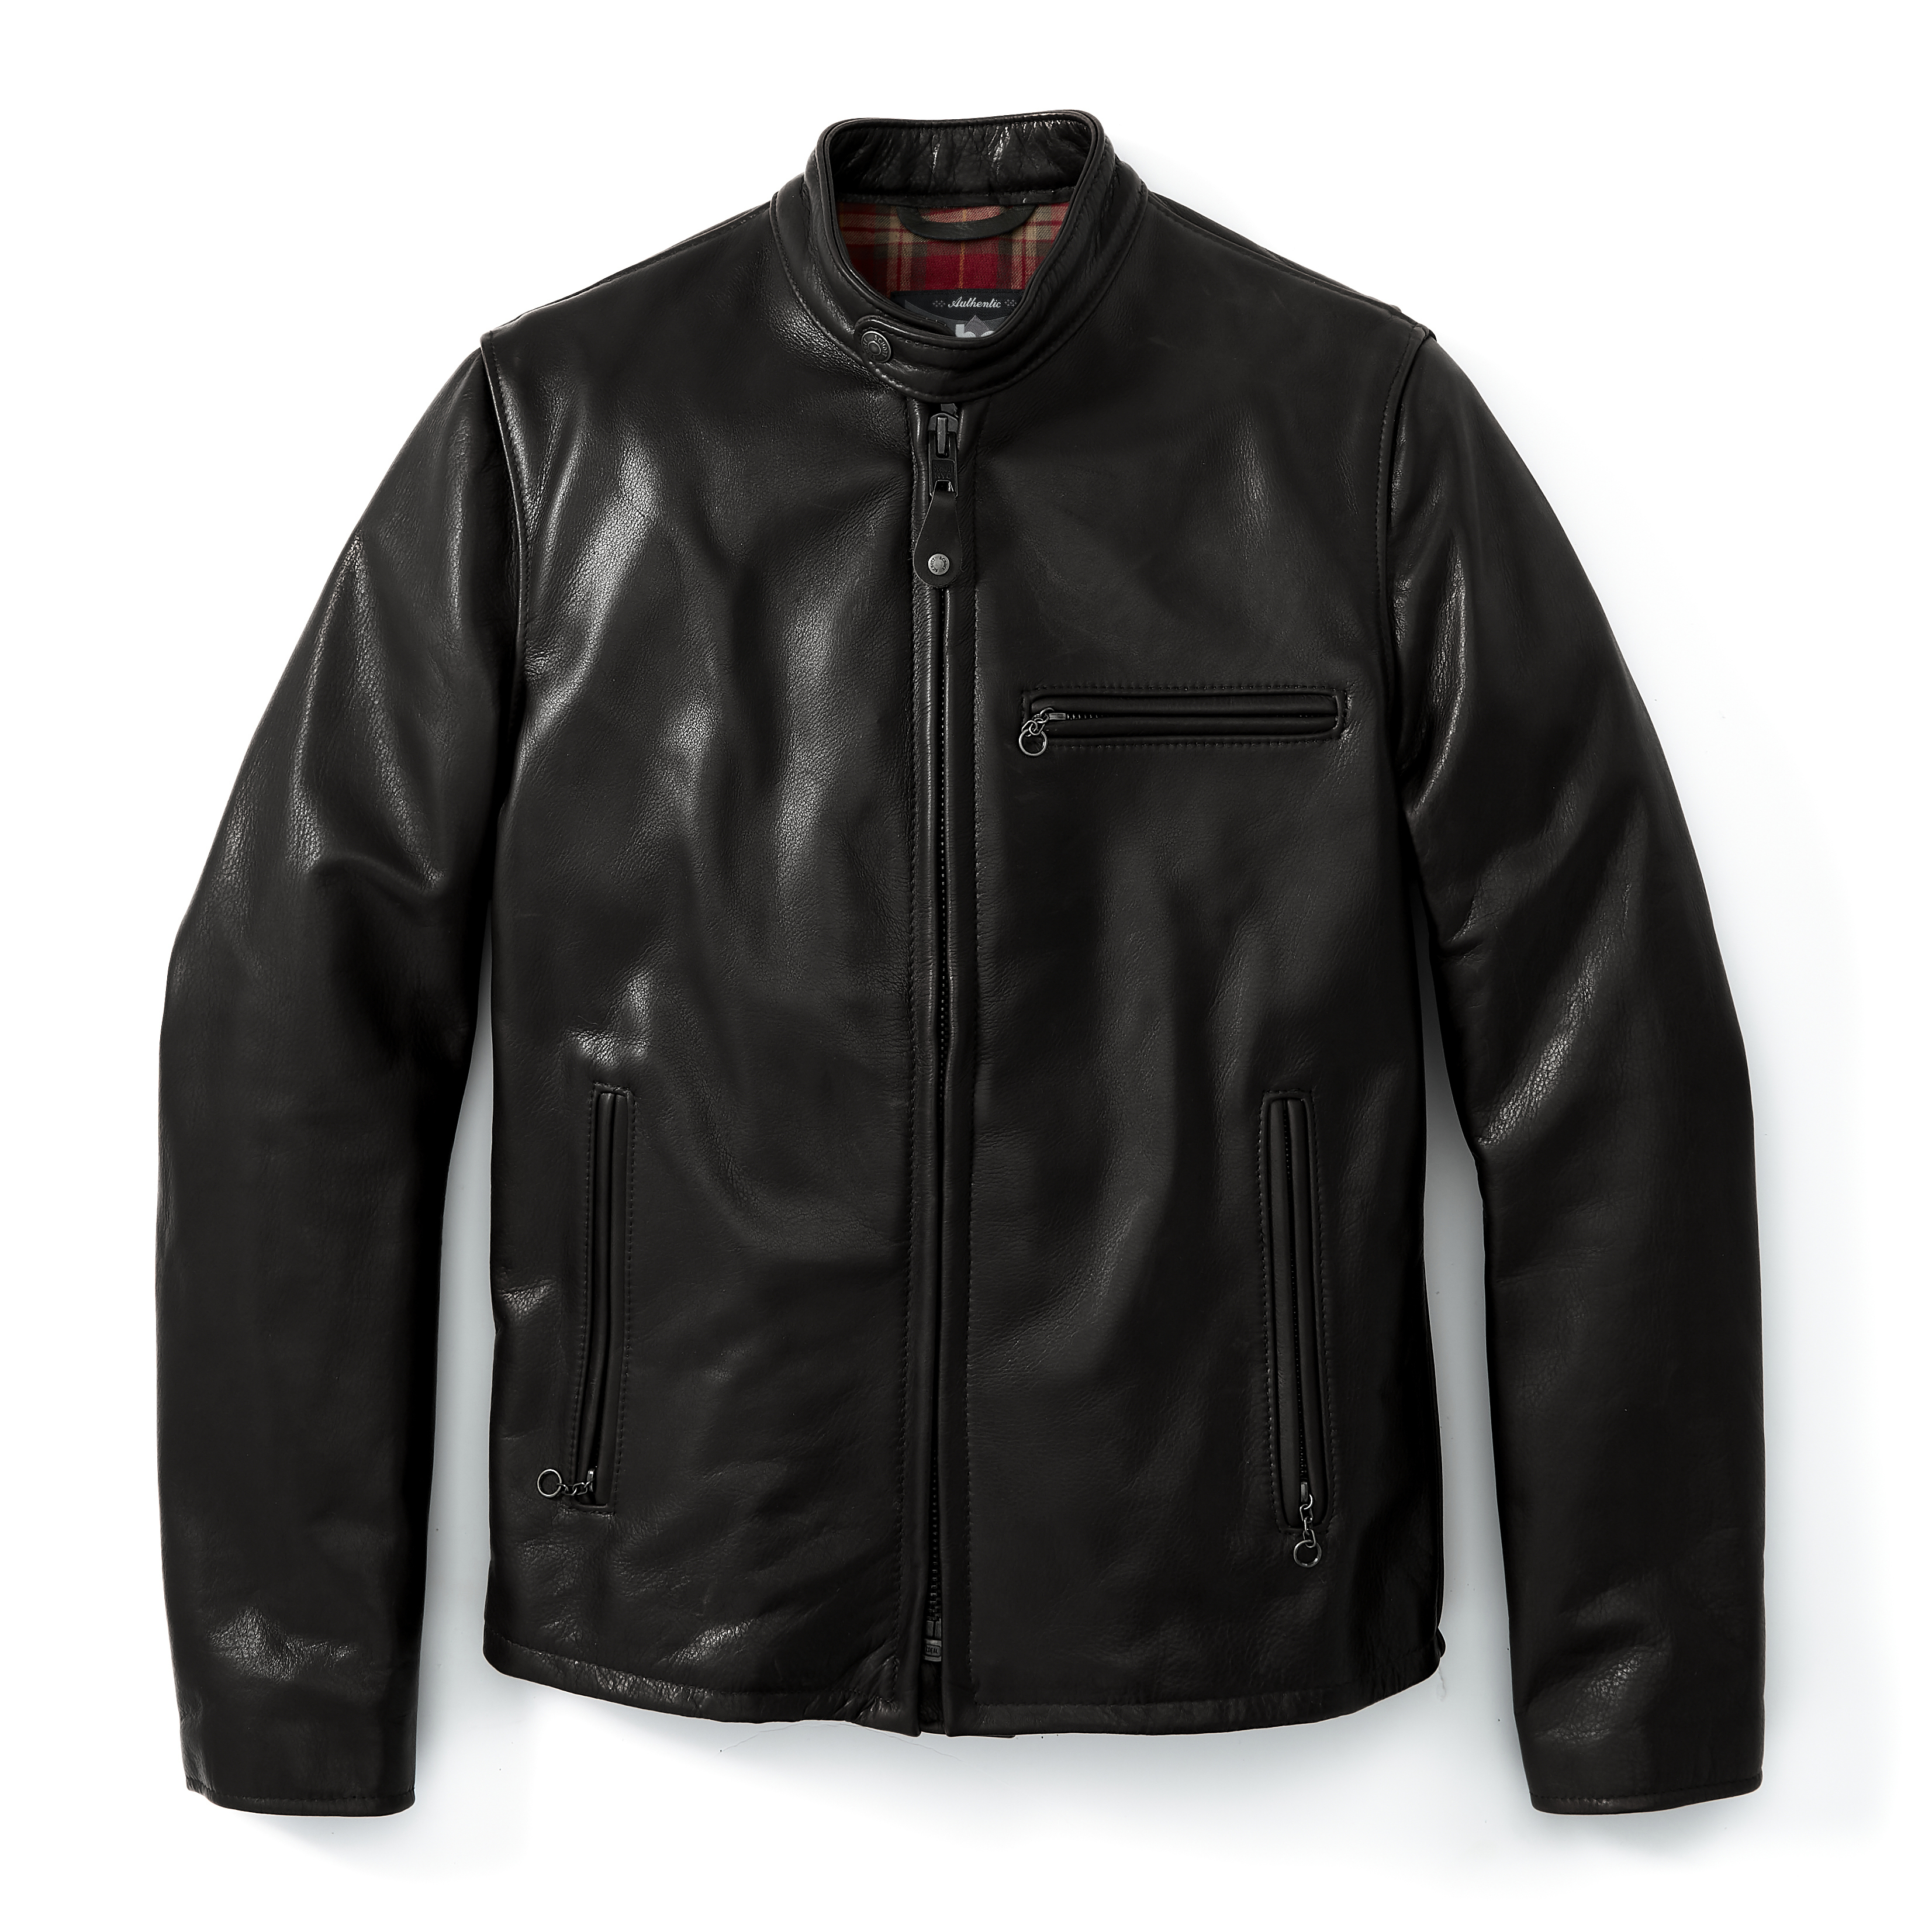 PARE 100% Genuine Leather Jacket for Men's